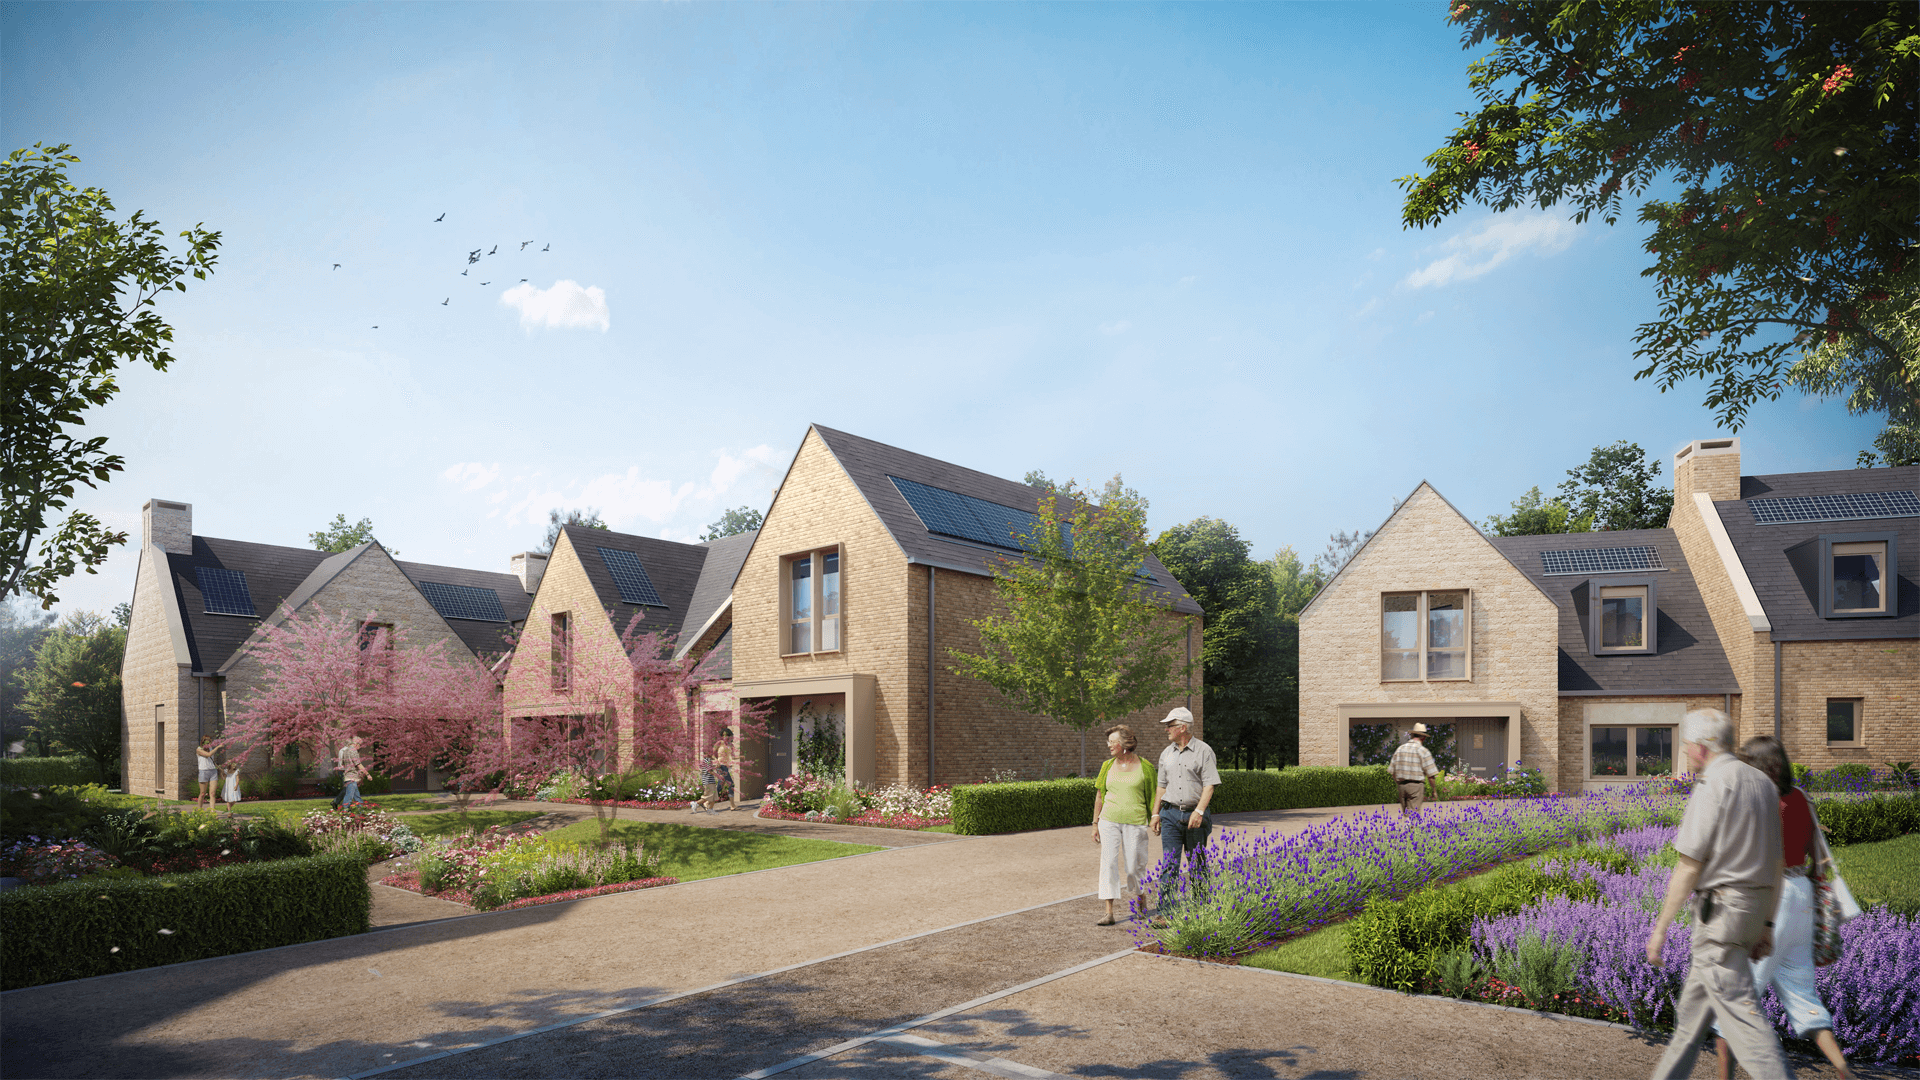 Plans submitted for new retirement community in Dore, Sheffield